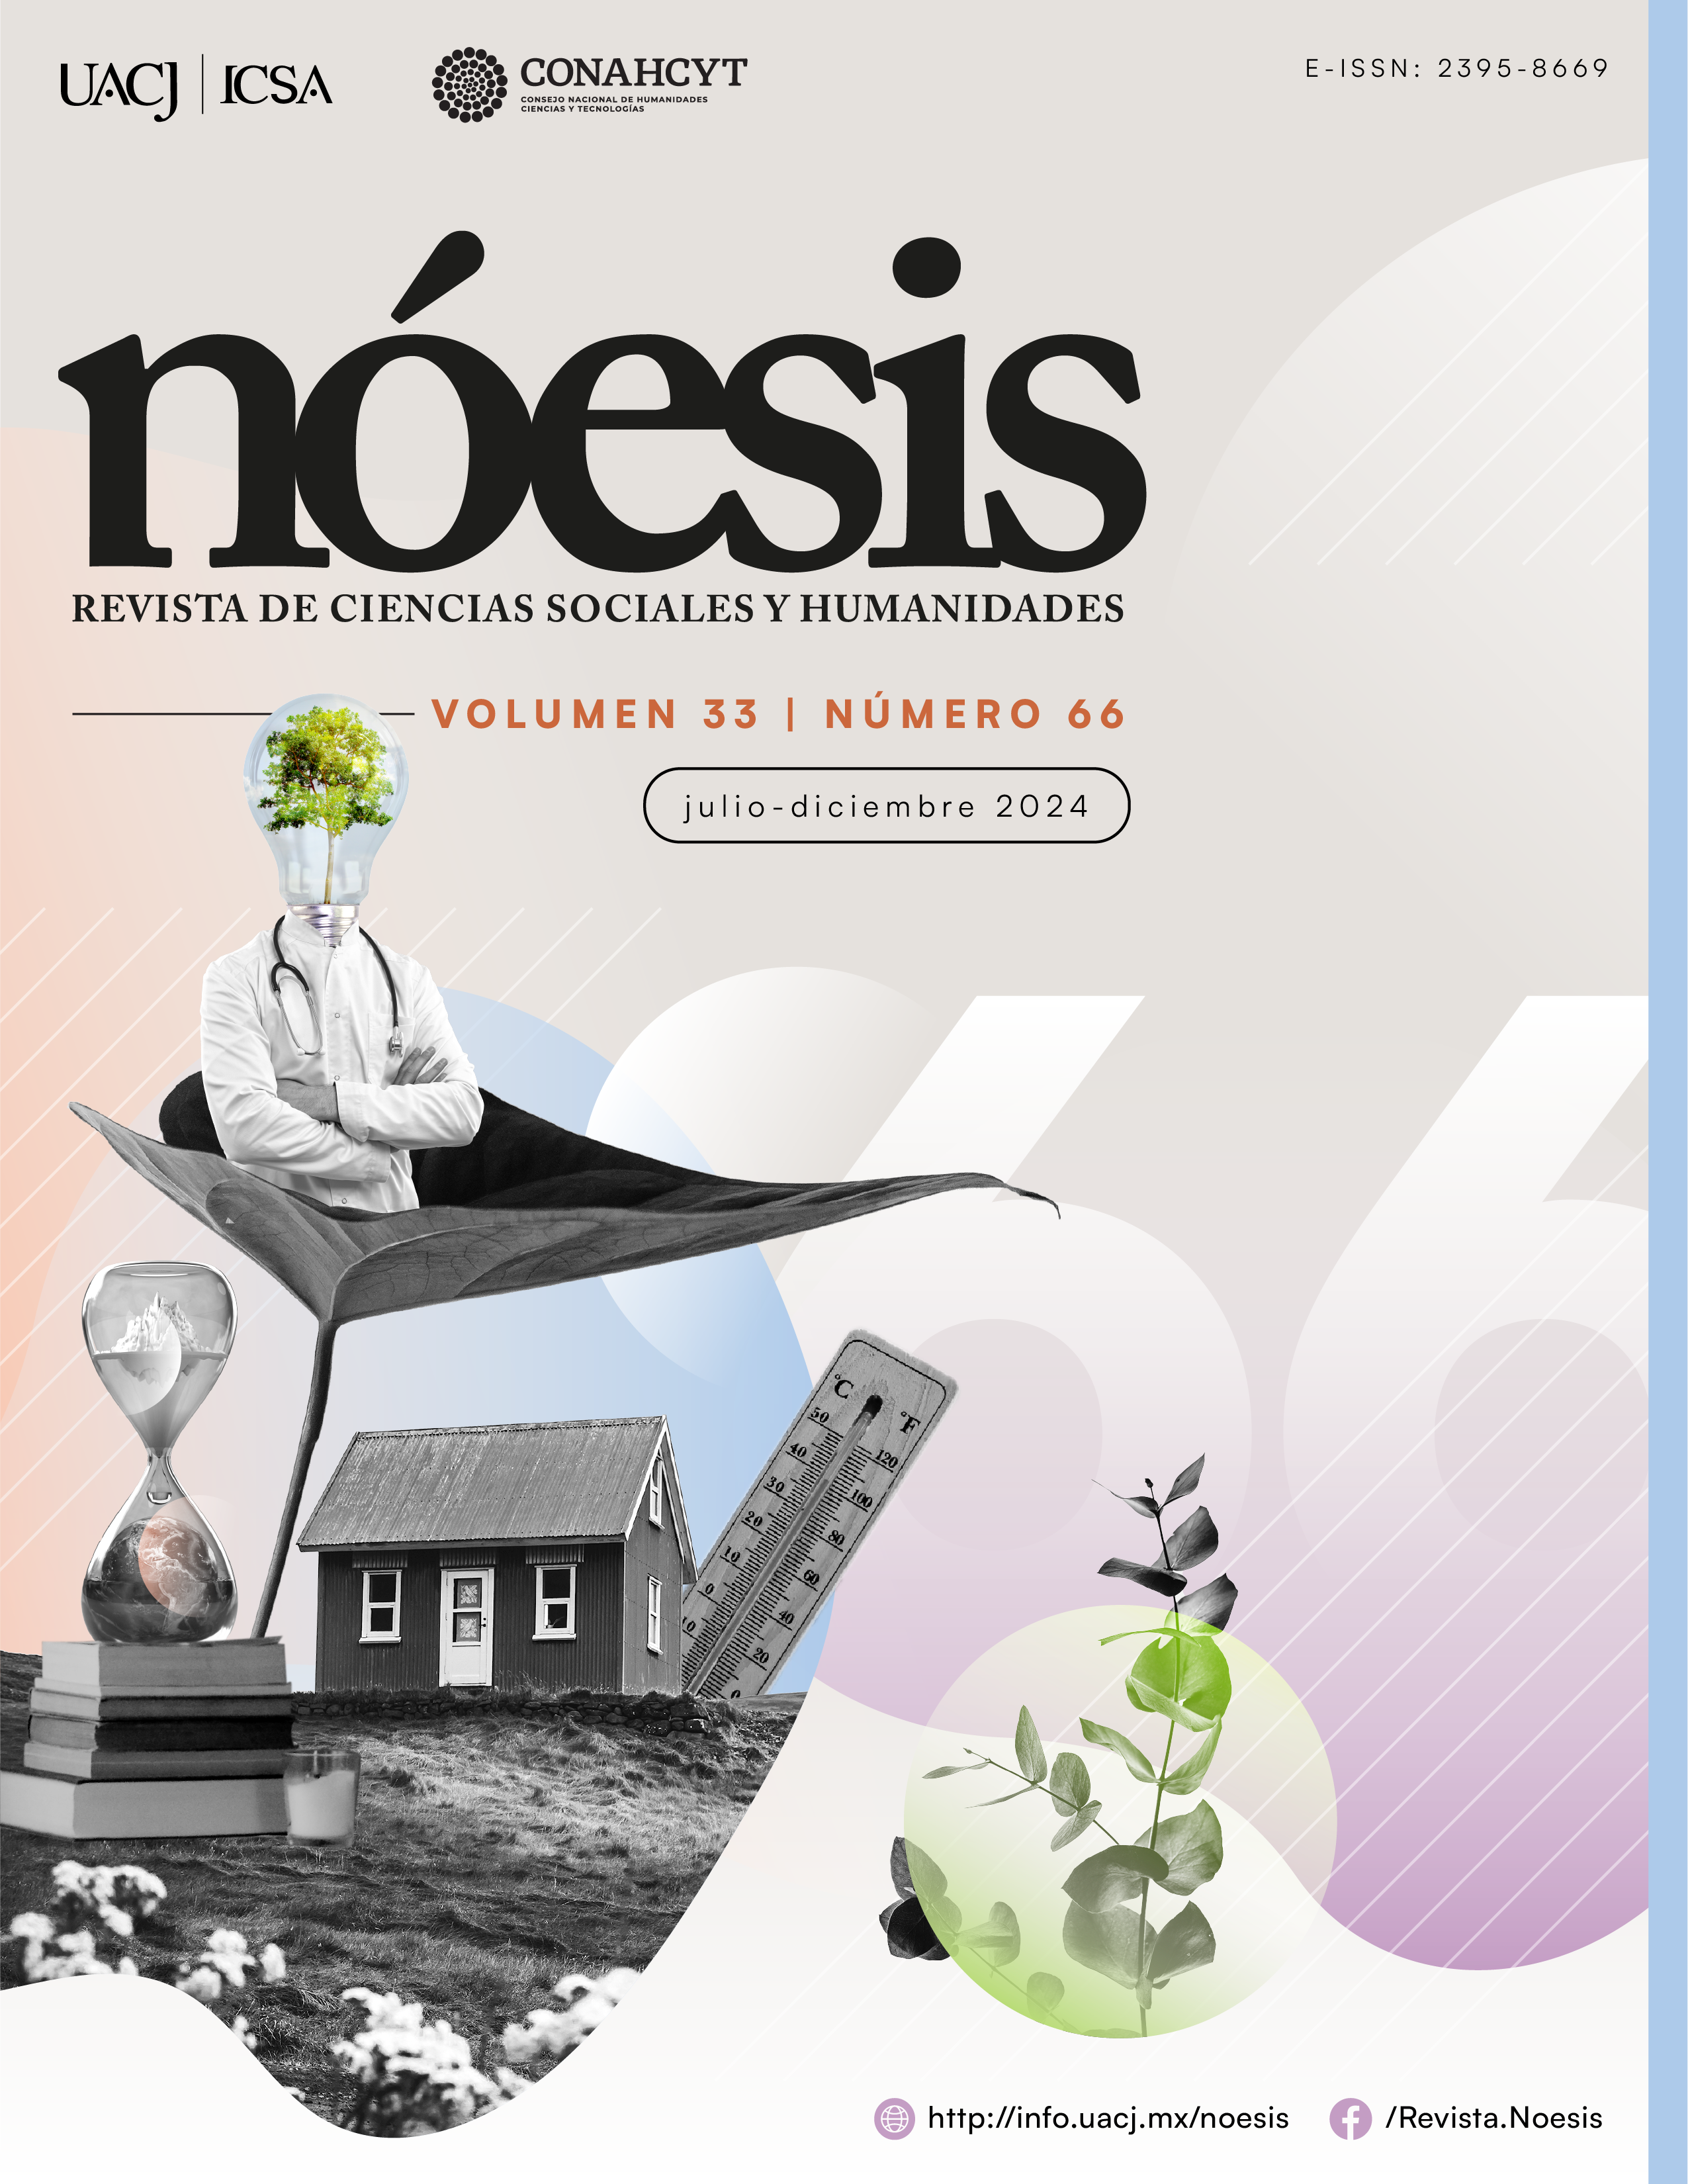 Invasion of social housing and the perception of loneliness: A case study on subdivisions with uninhabited homes in the southeast of Ciudad Juárez